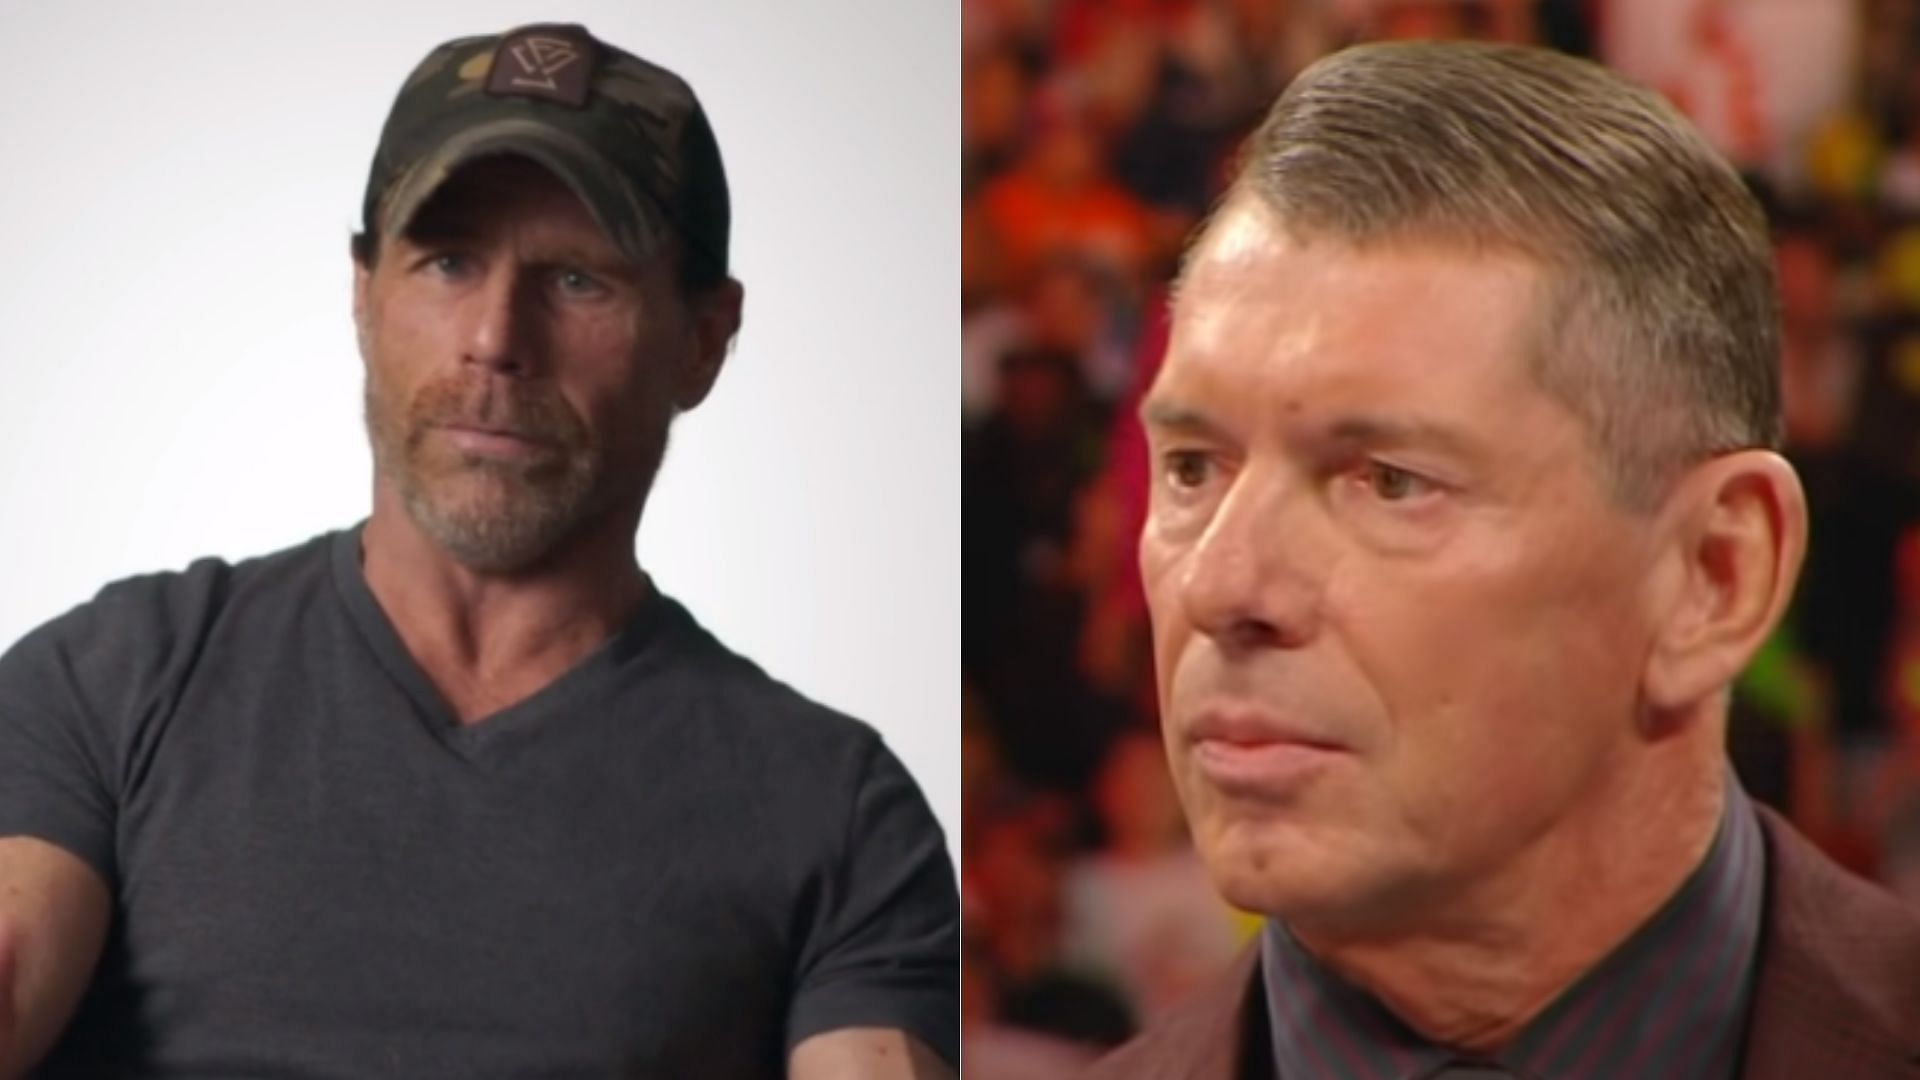 Shawn Michaels (left) and Vince McMahon (right)